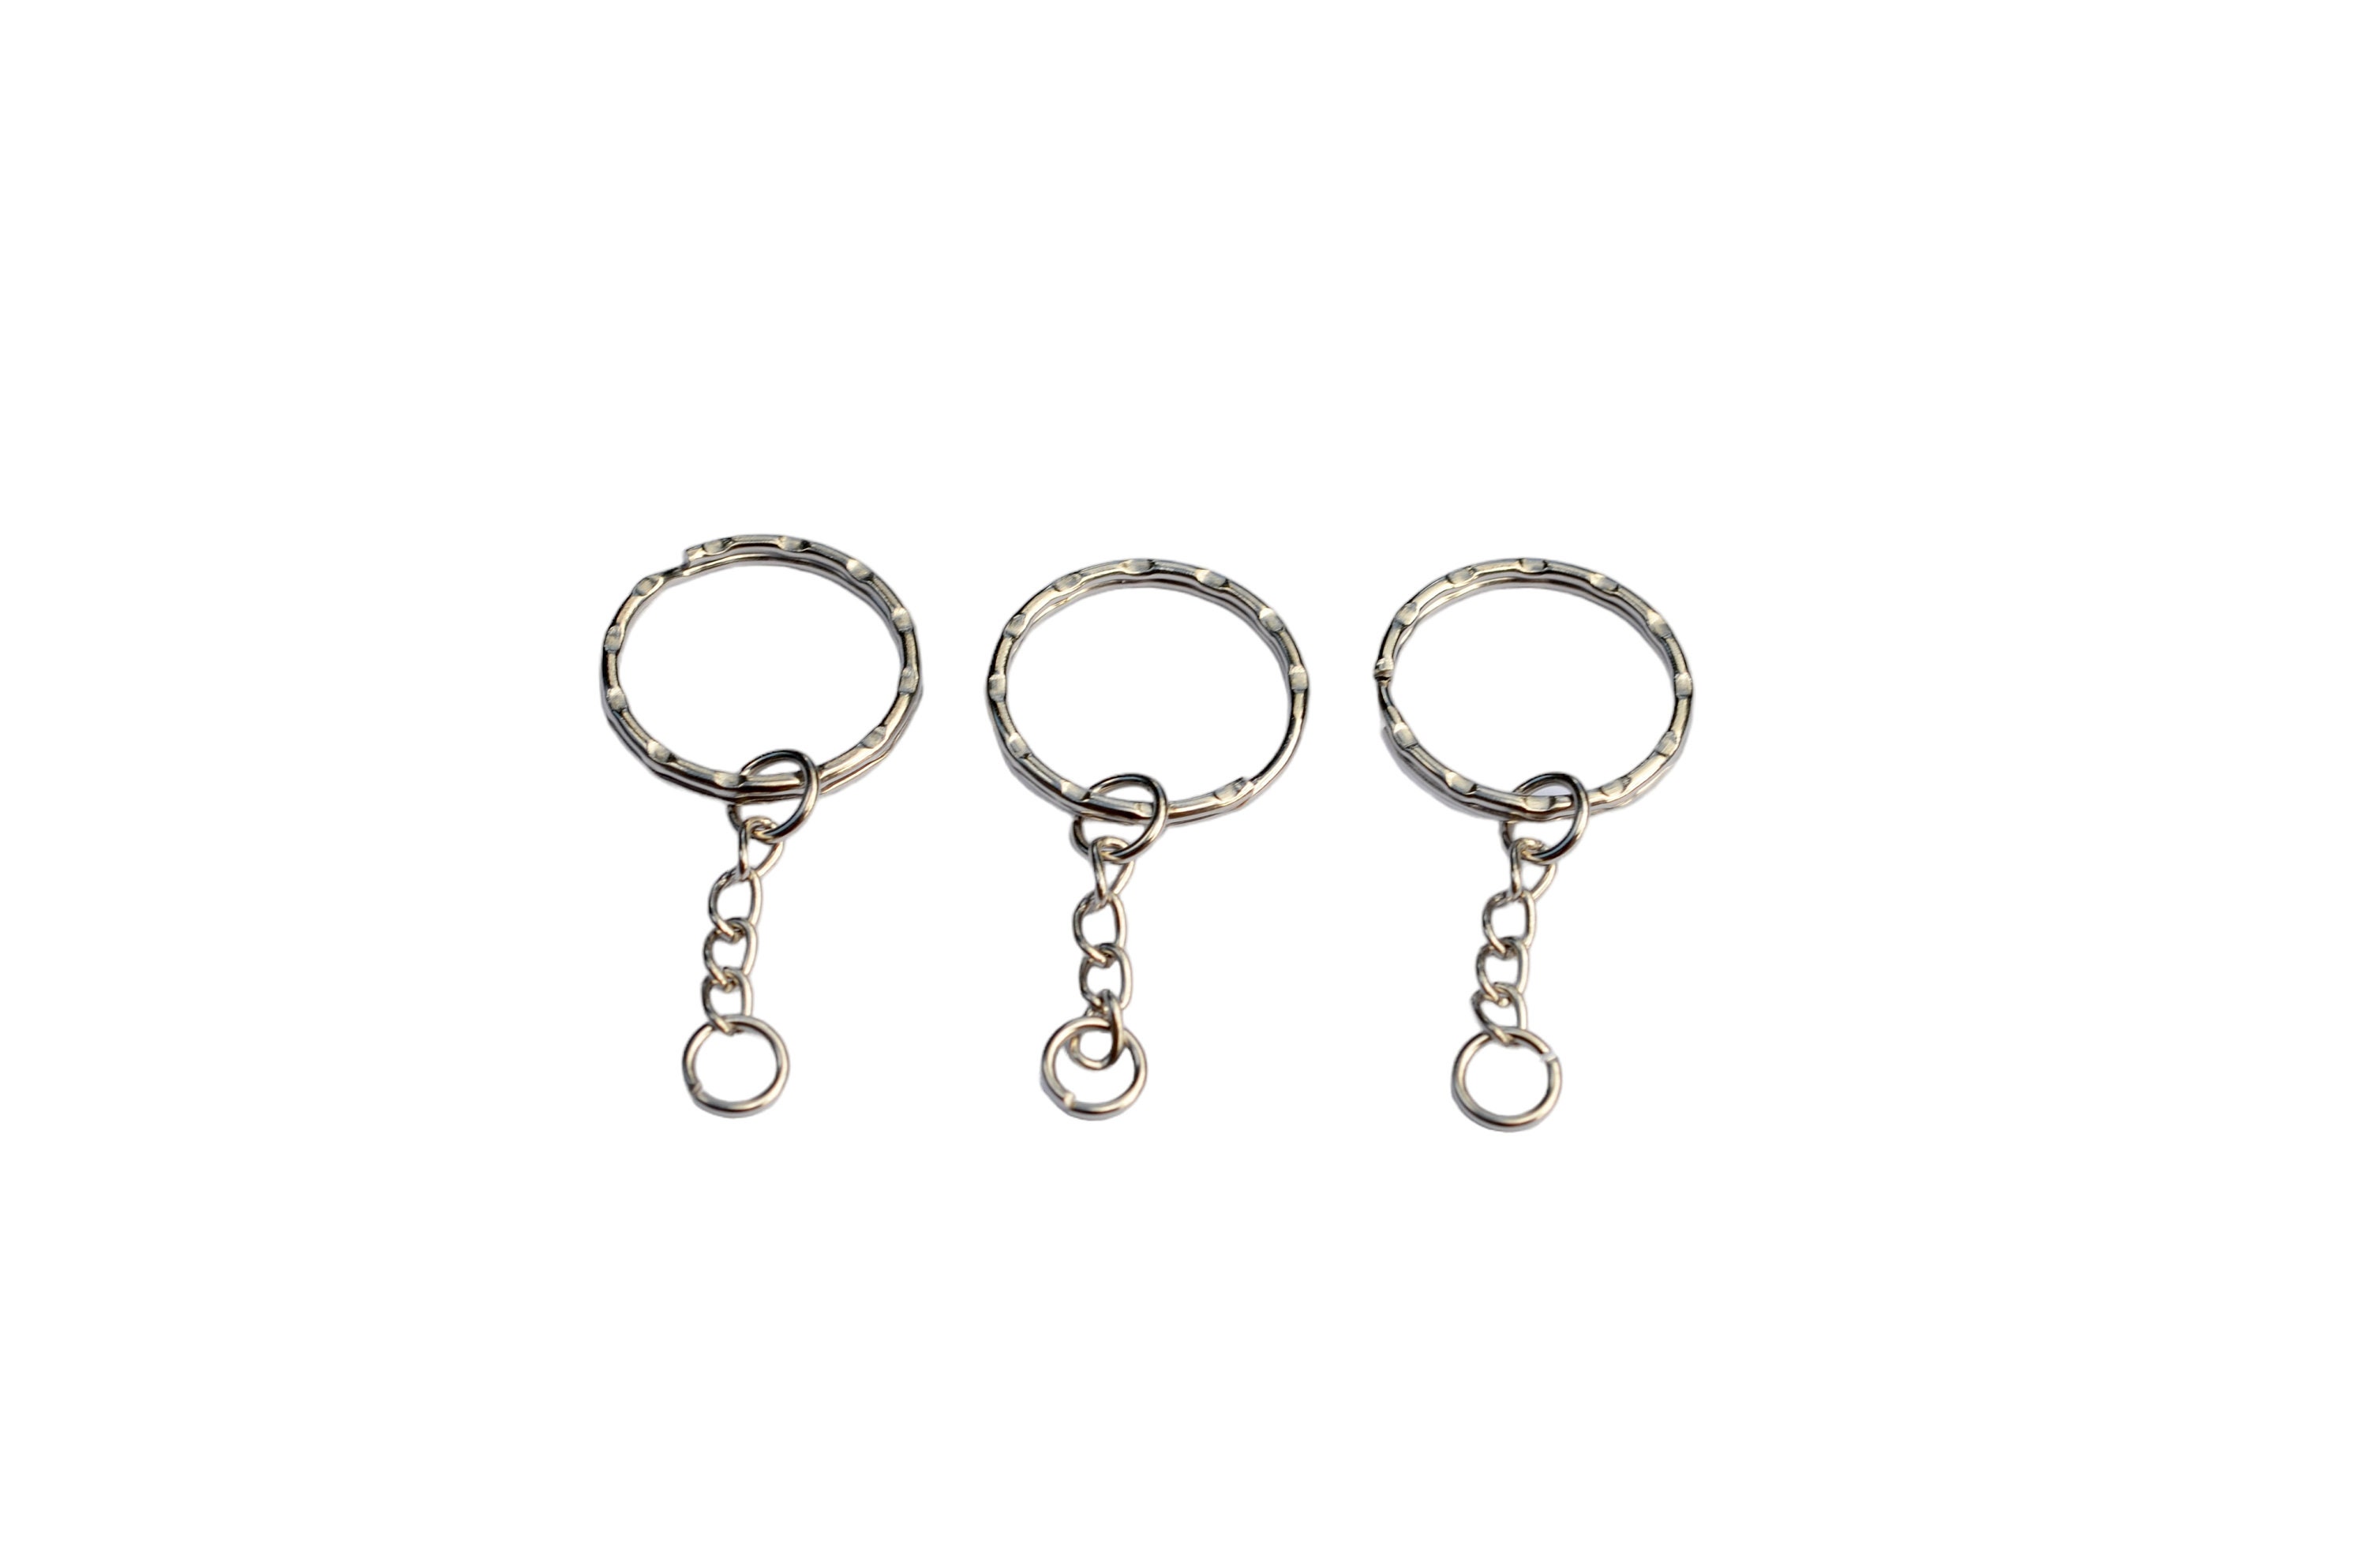 BULK 20 Key Ring Holder Silver Tone With Extender Chain F321 